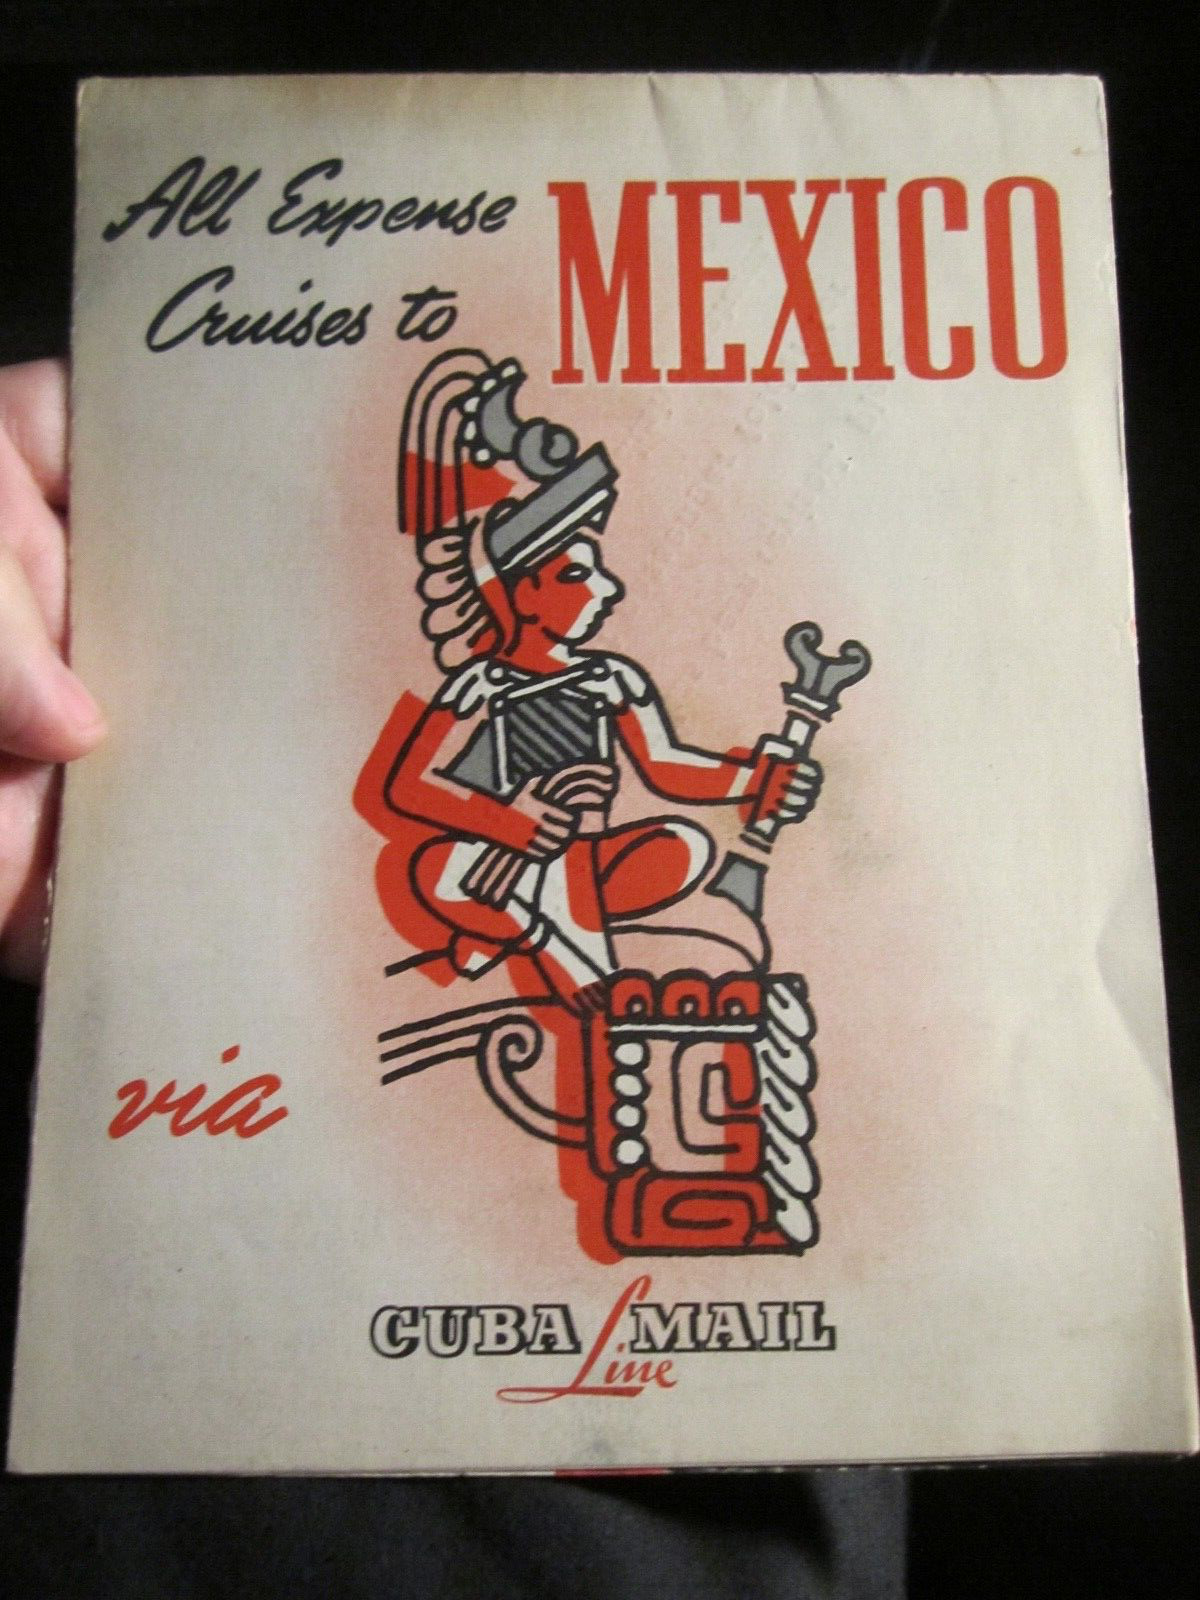 1939 ALL EXPENSE CRUISES TO MEXICO BOOKLET ADVERTISING BBA-42